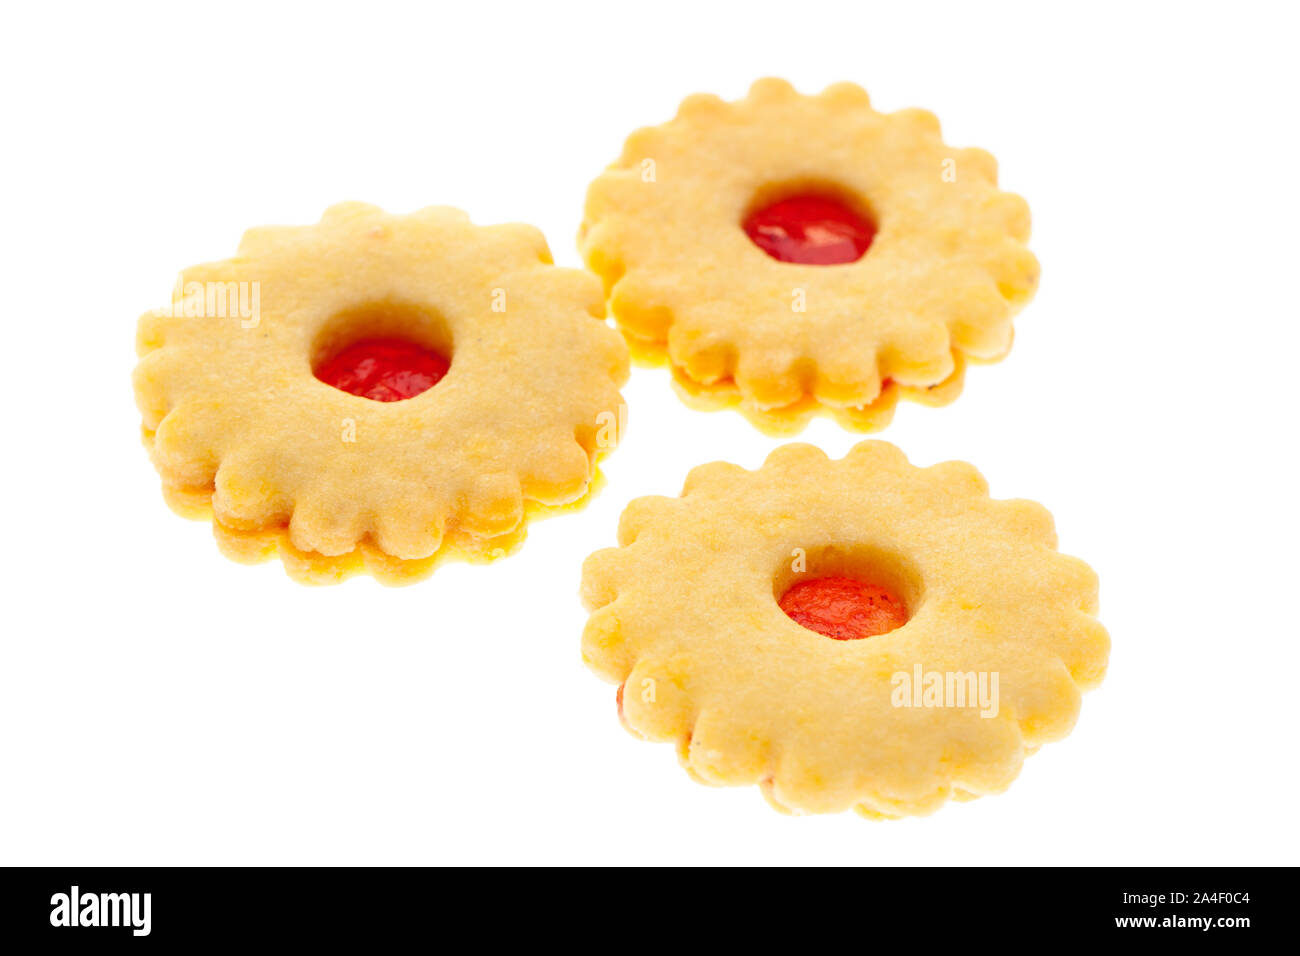 chrismas cookies: several round Christmas cookies with strawberry jam Stock Photo